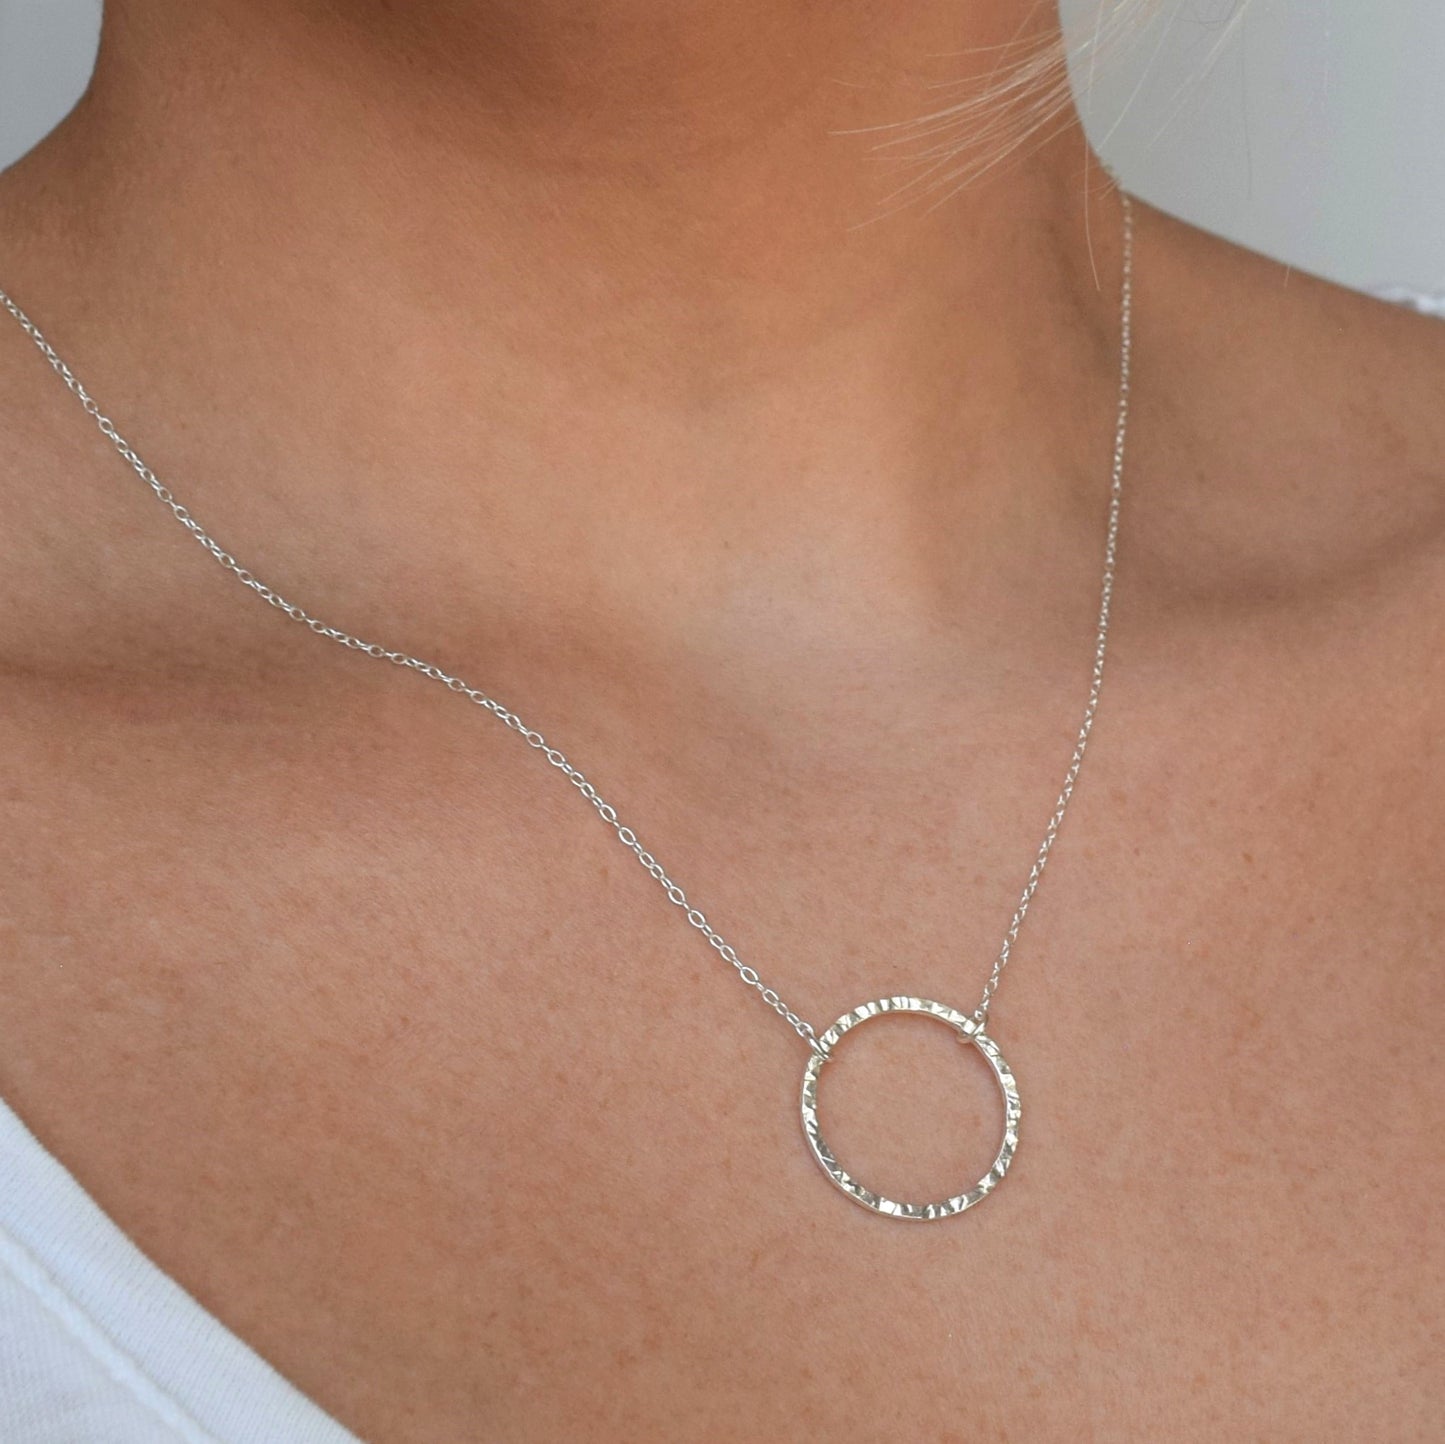 Textured silver circle necklace, length 18", worn by model